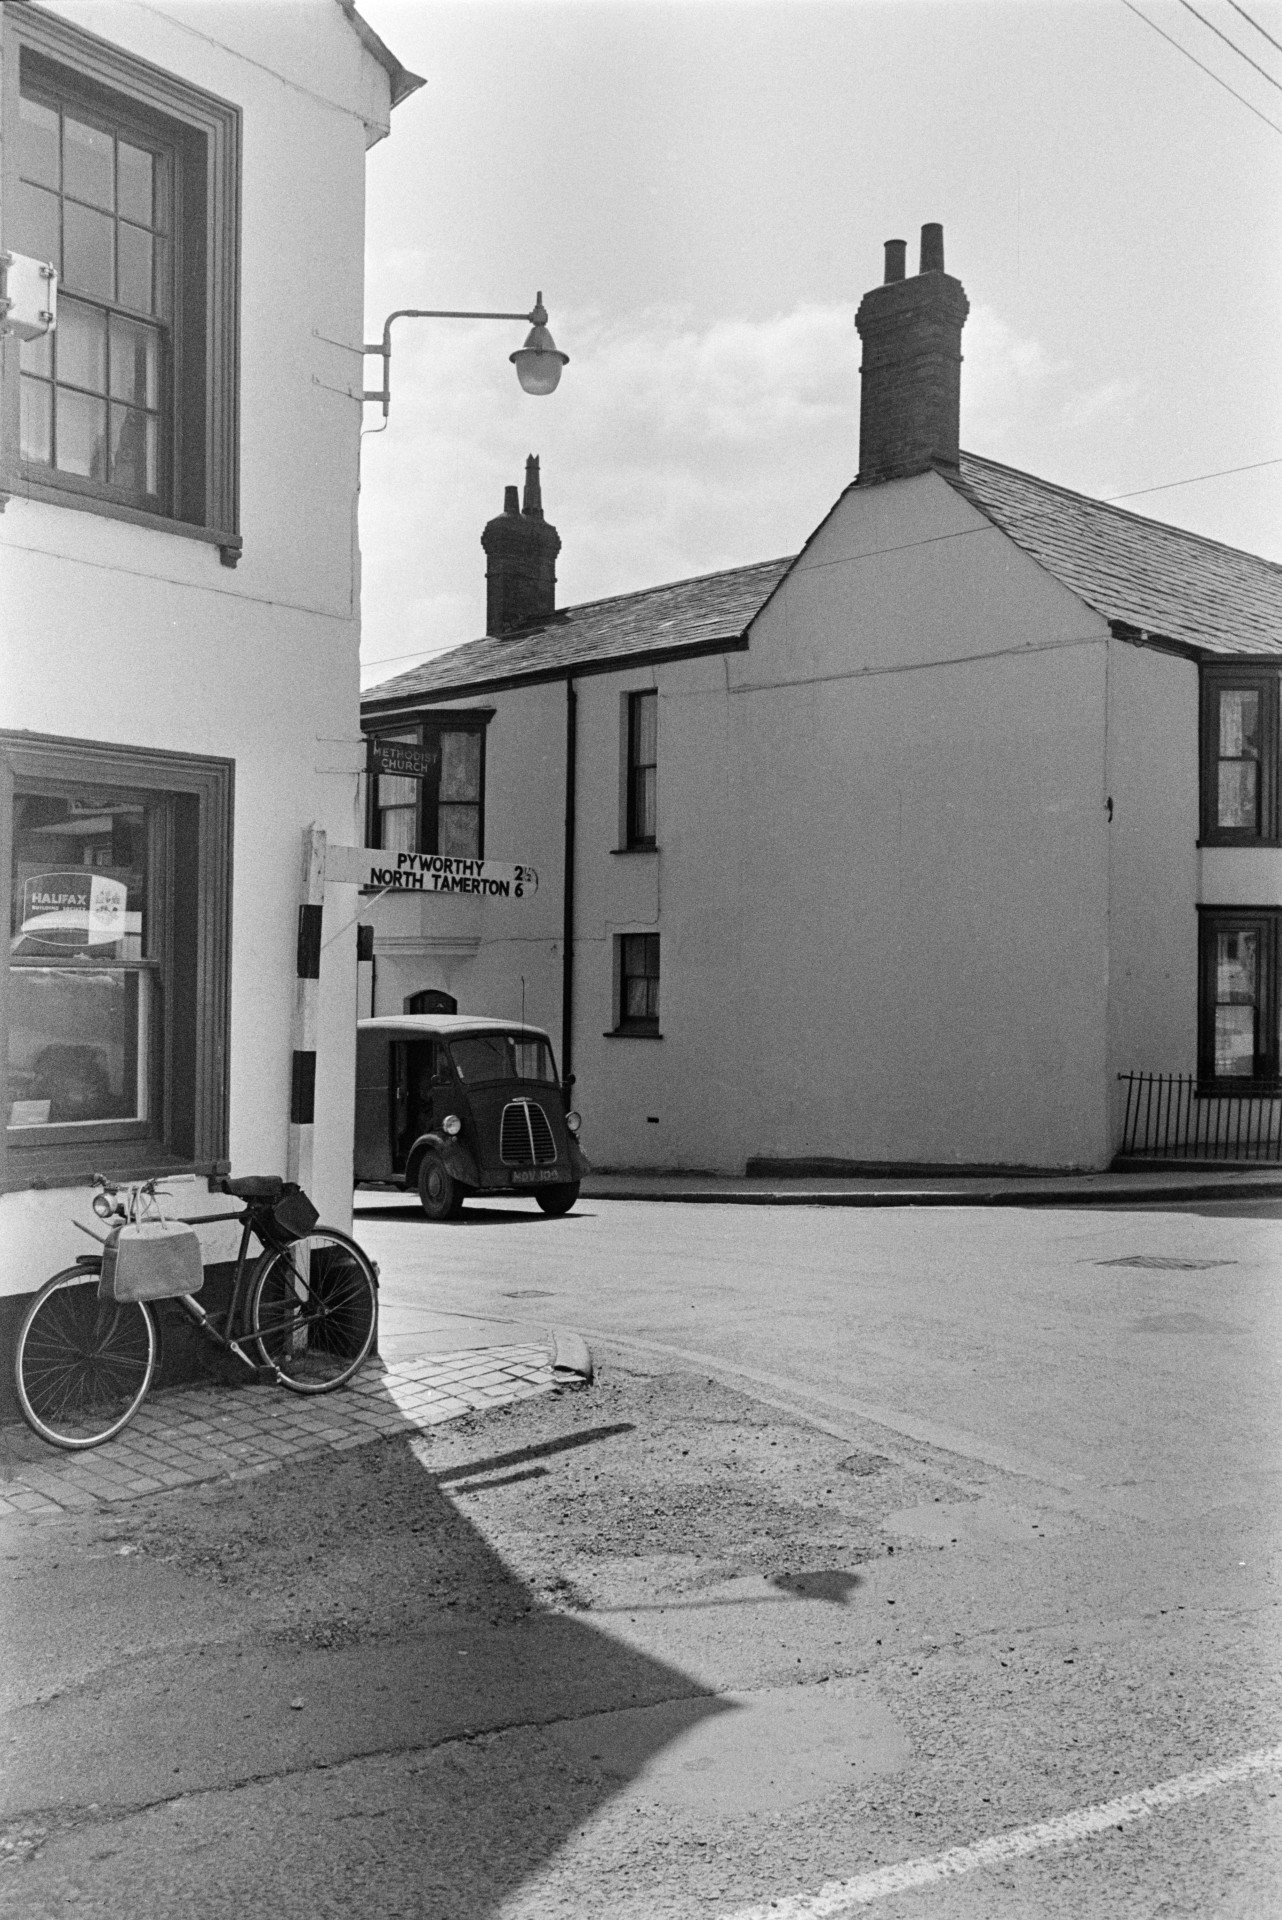 A street in Holsworthy with houses and a van. A bicycle is parked by a window, next to a signpost.